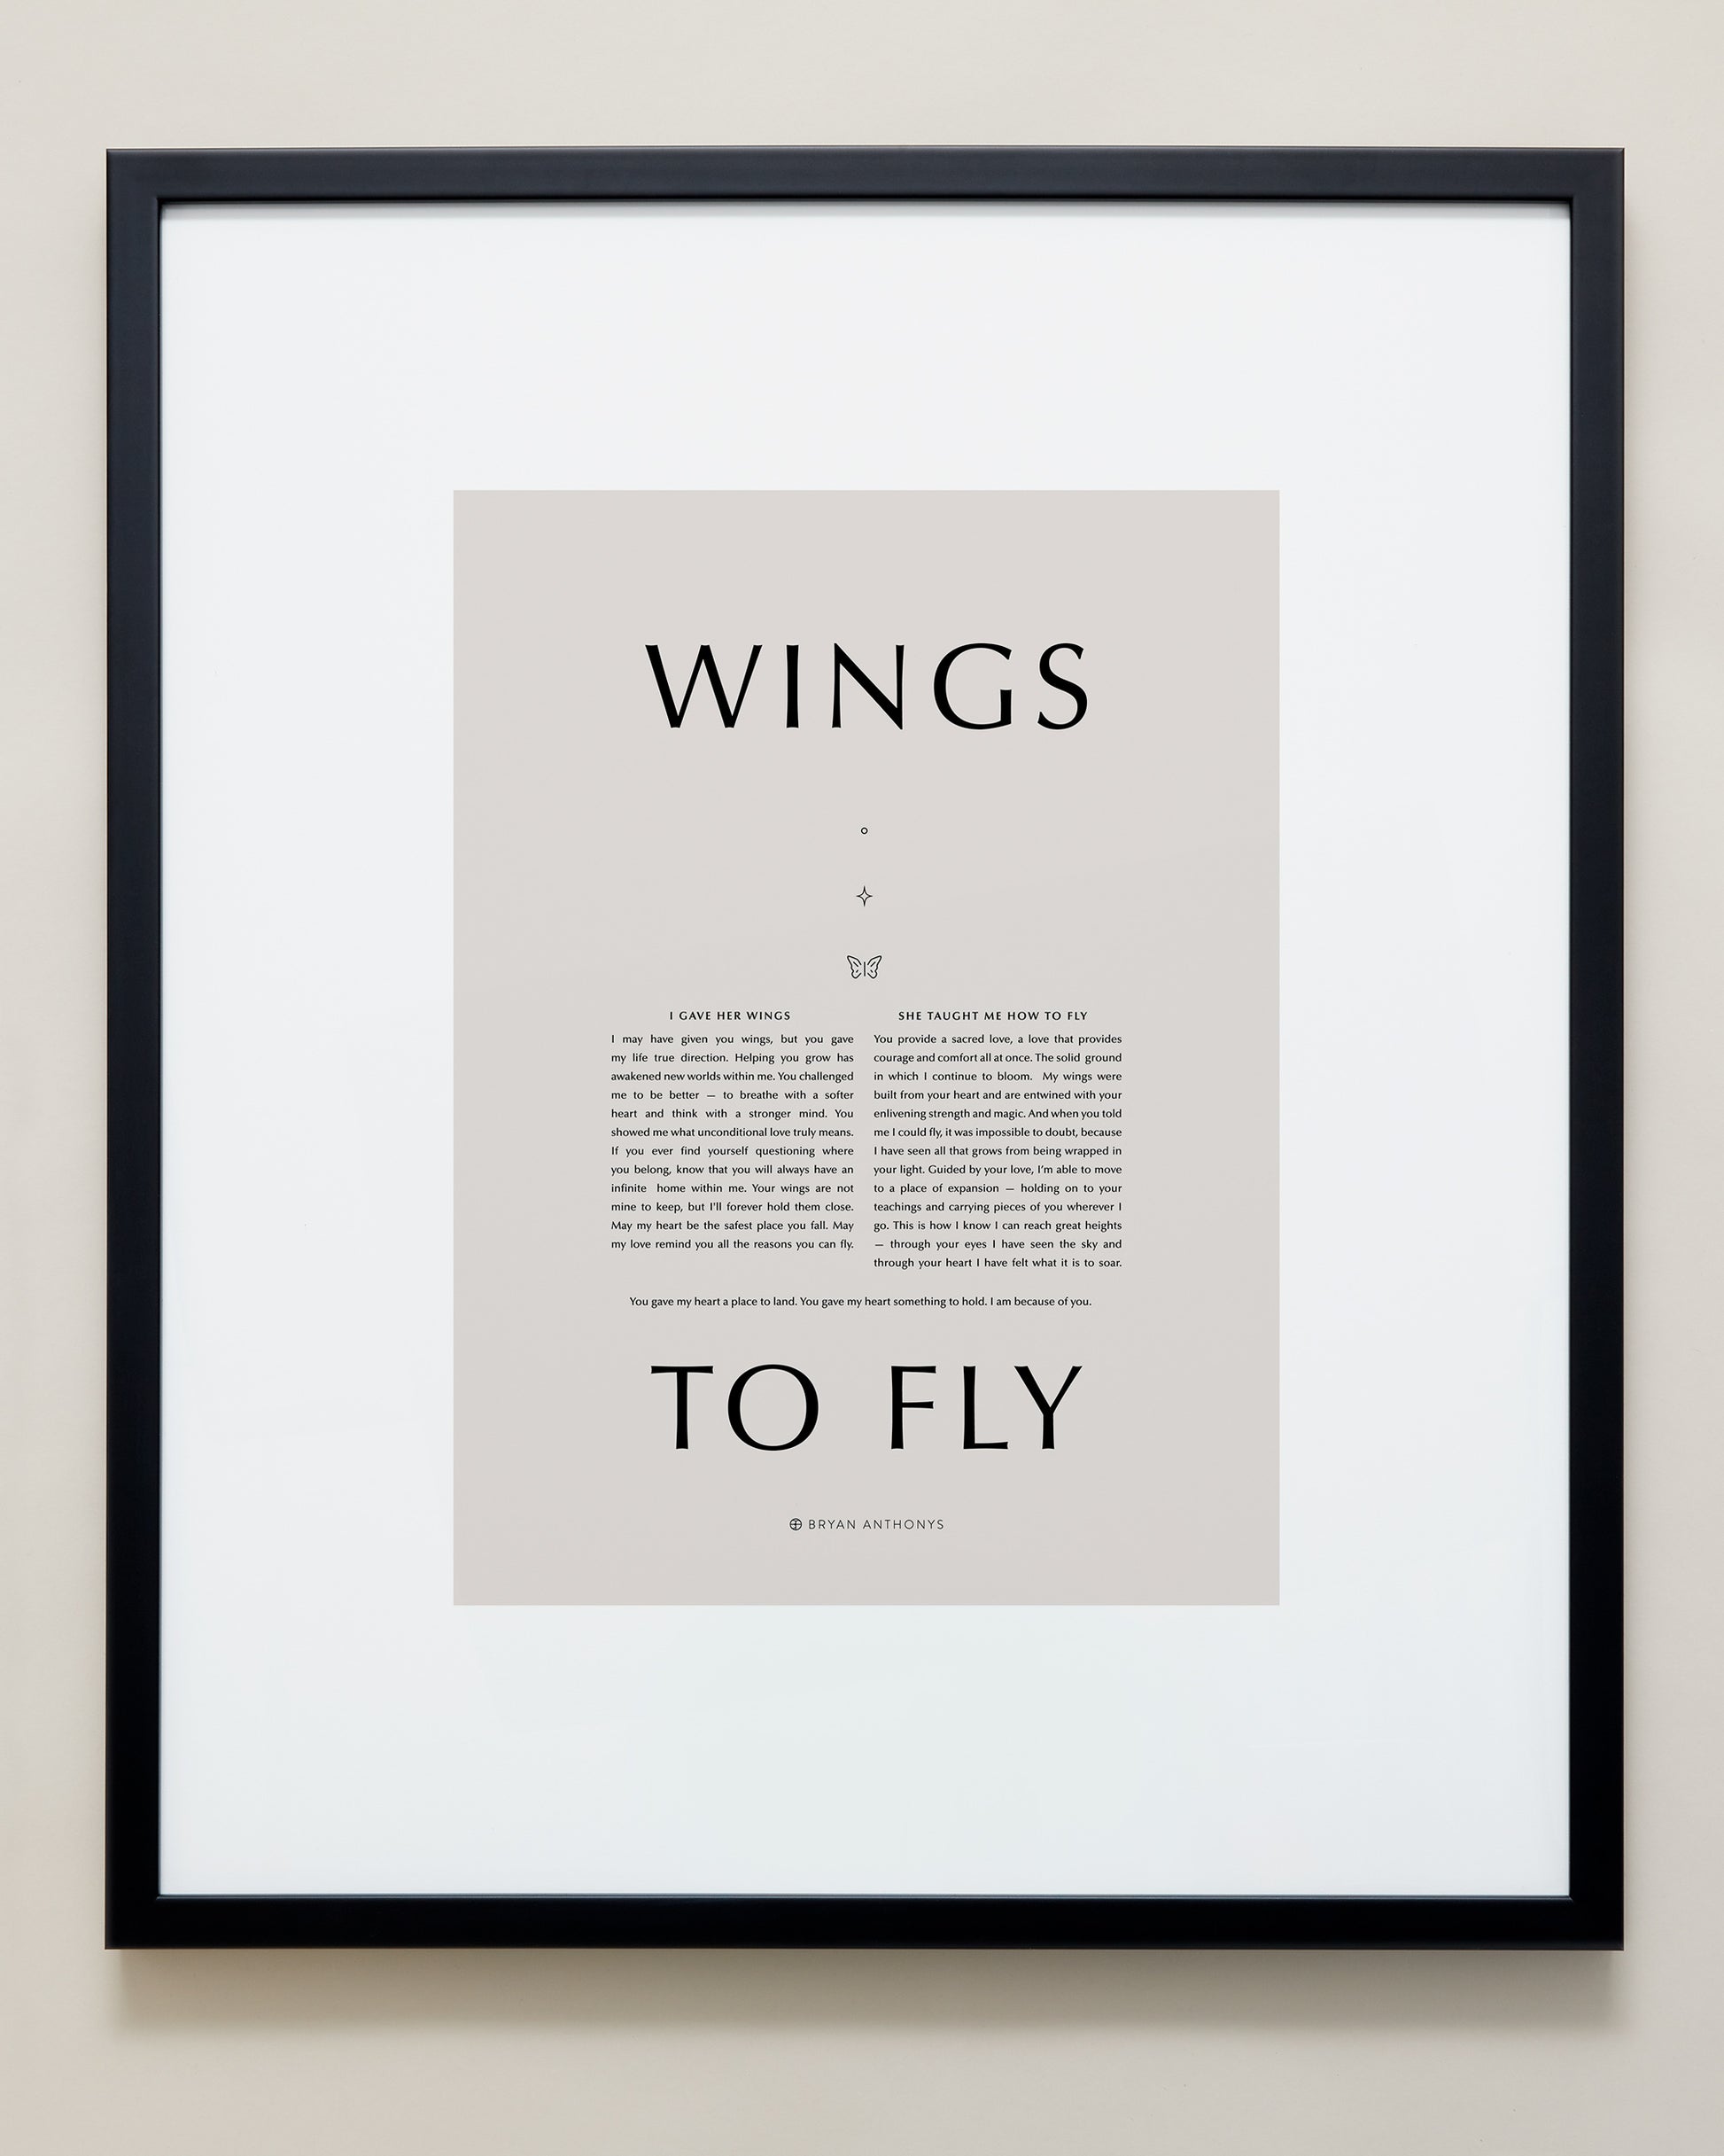 Bryan Anthonys Home Decor Wings To Fly Framed Print 20x24 Black Frame with Tan